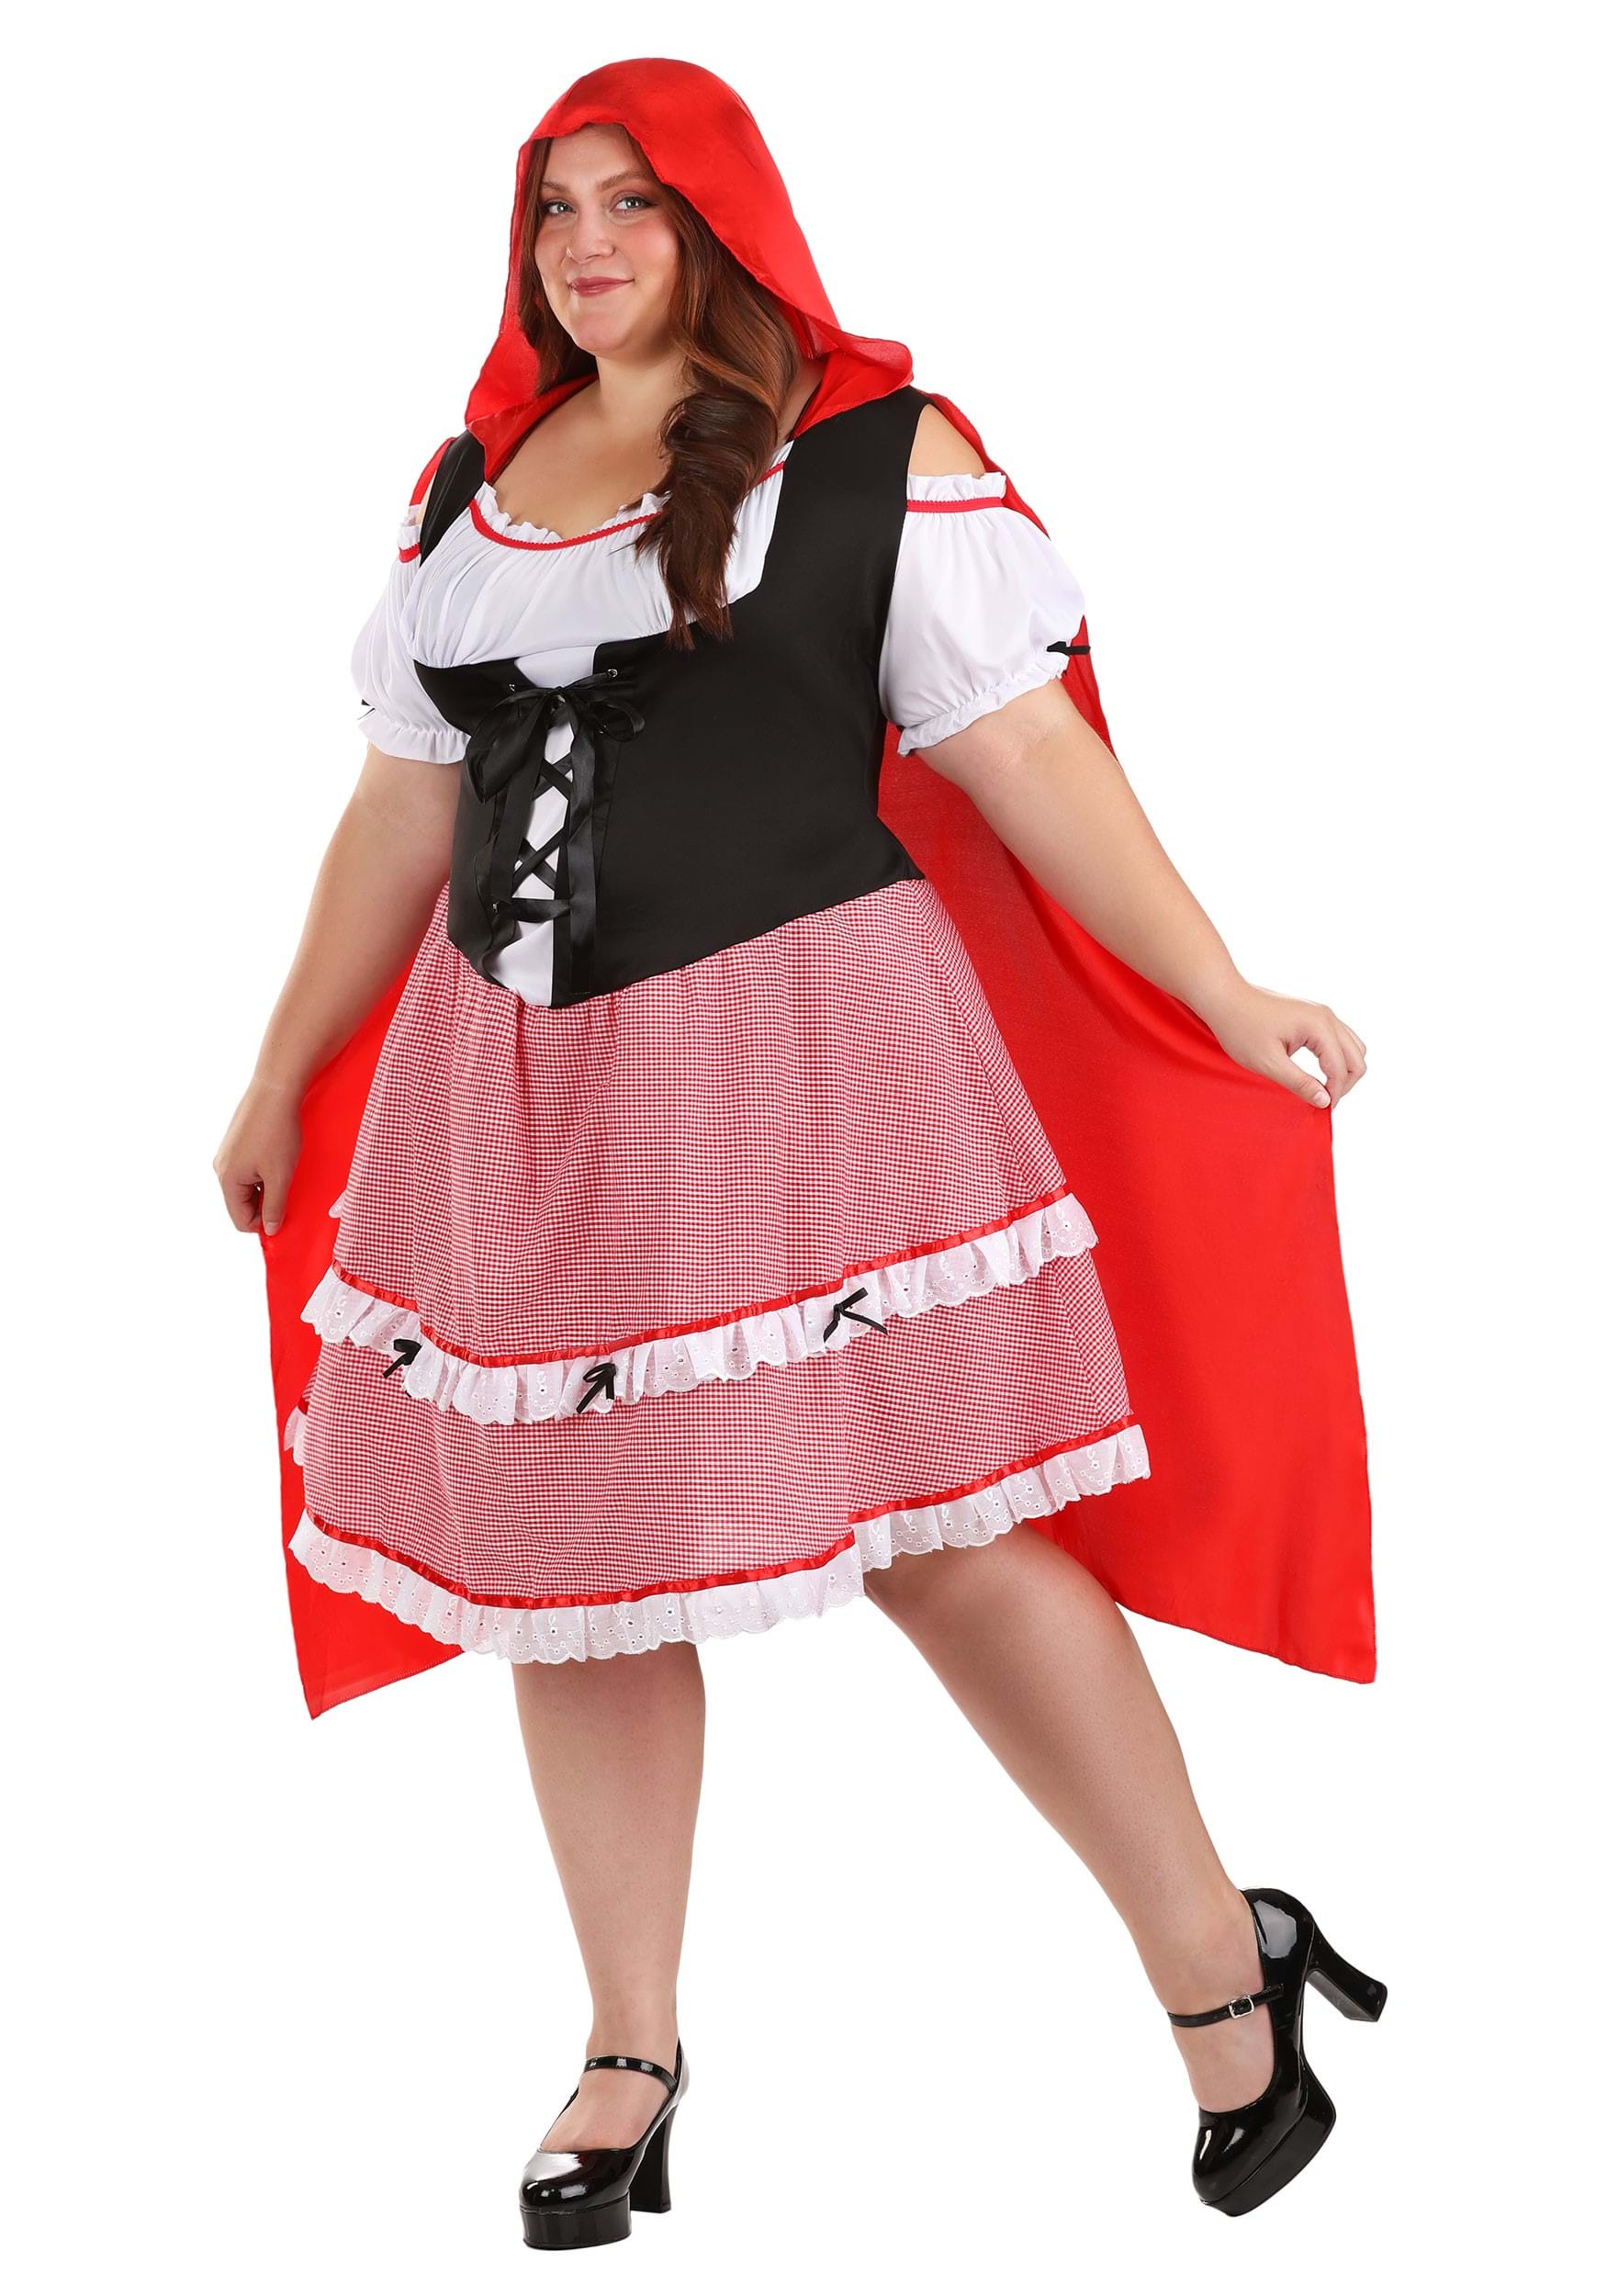 Photos - Fancy Dress FUN Costumes Knee Length Red Riding Hood Plus Size Costume for Women | Sto